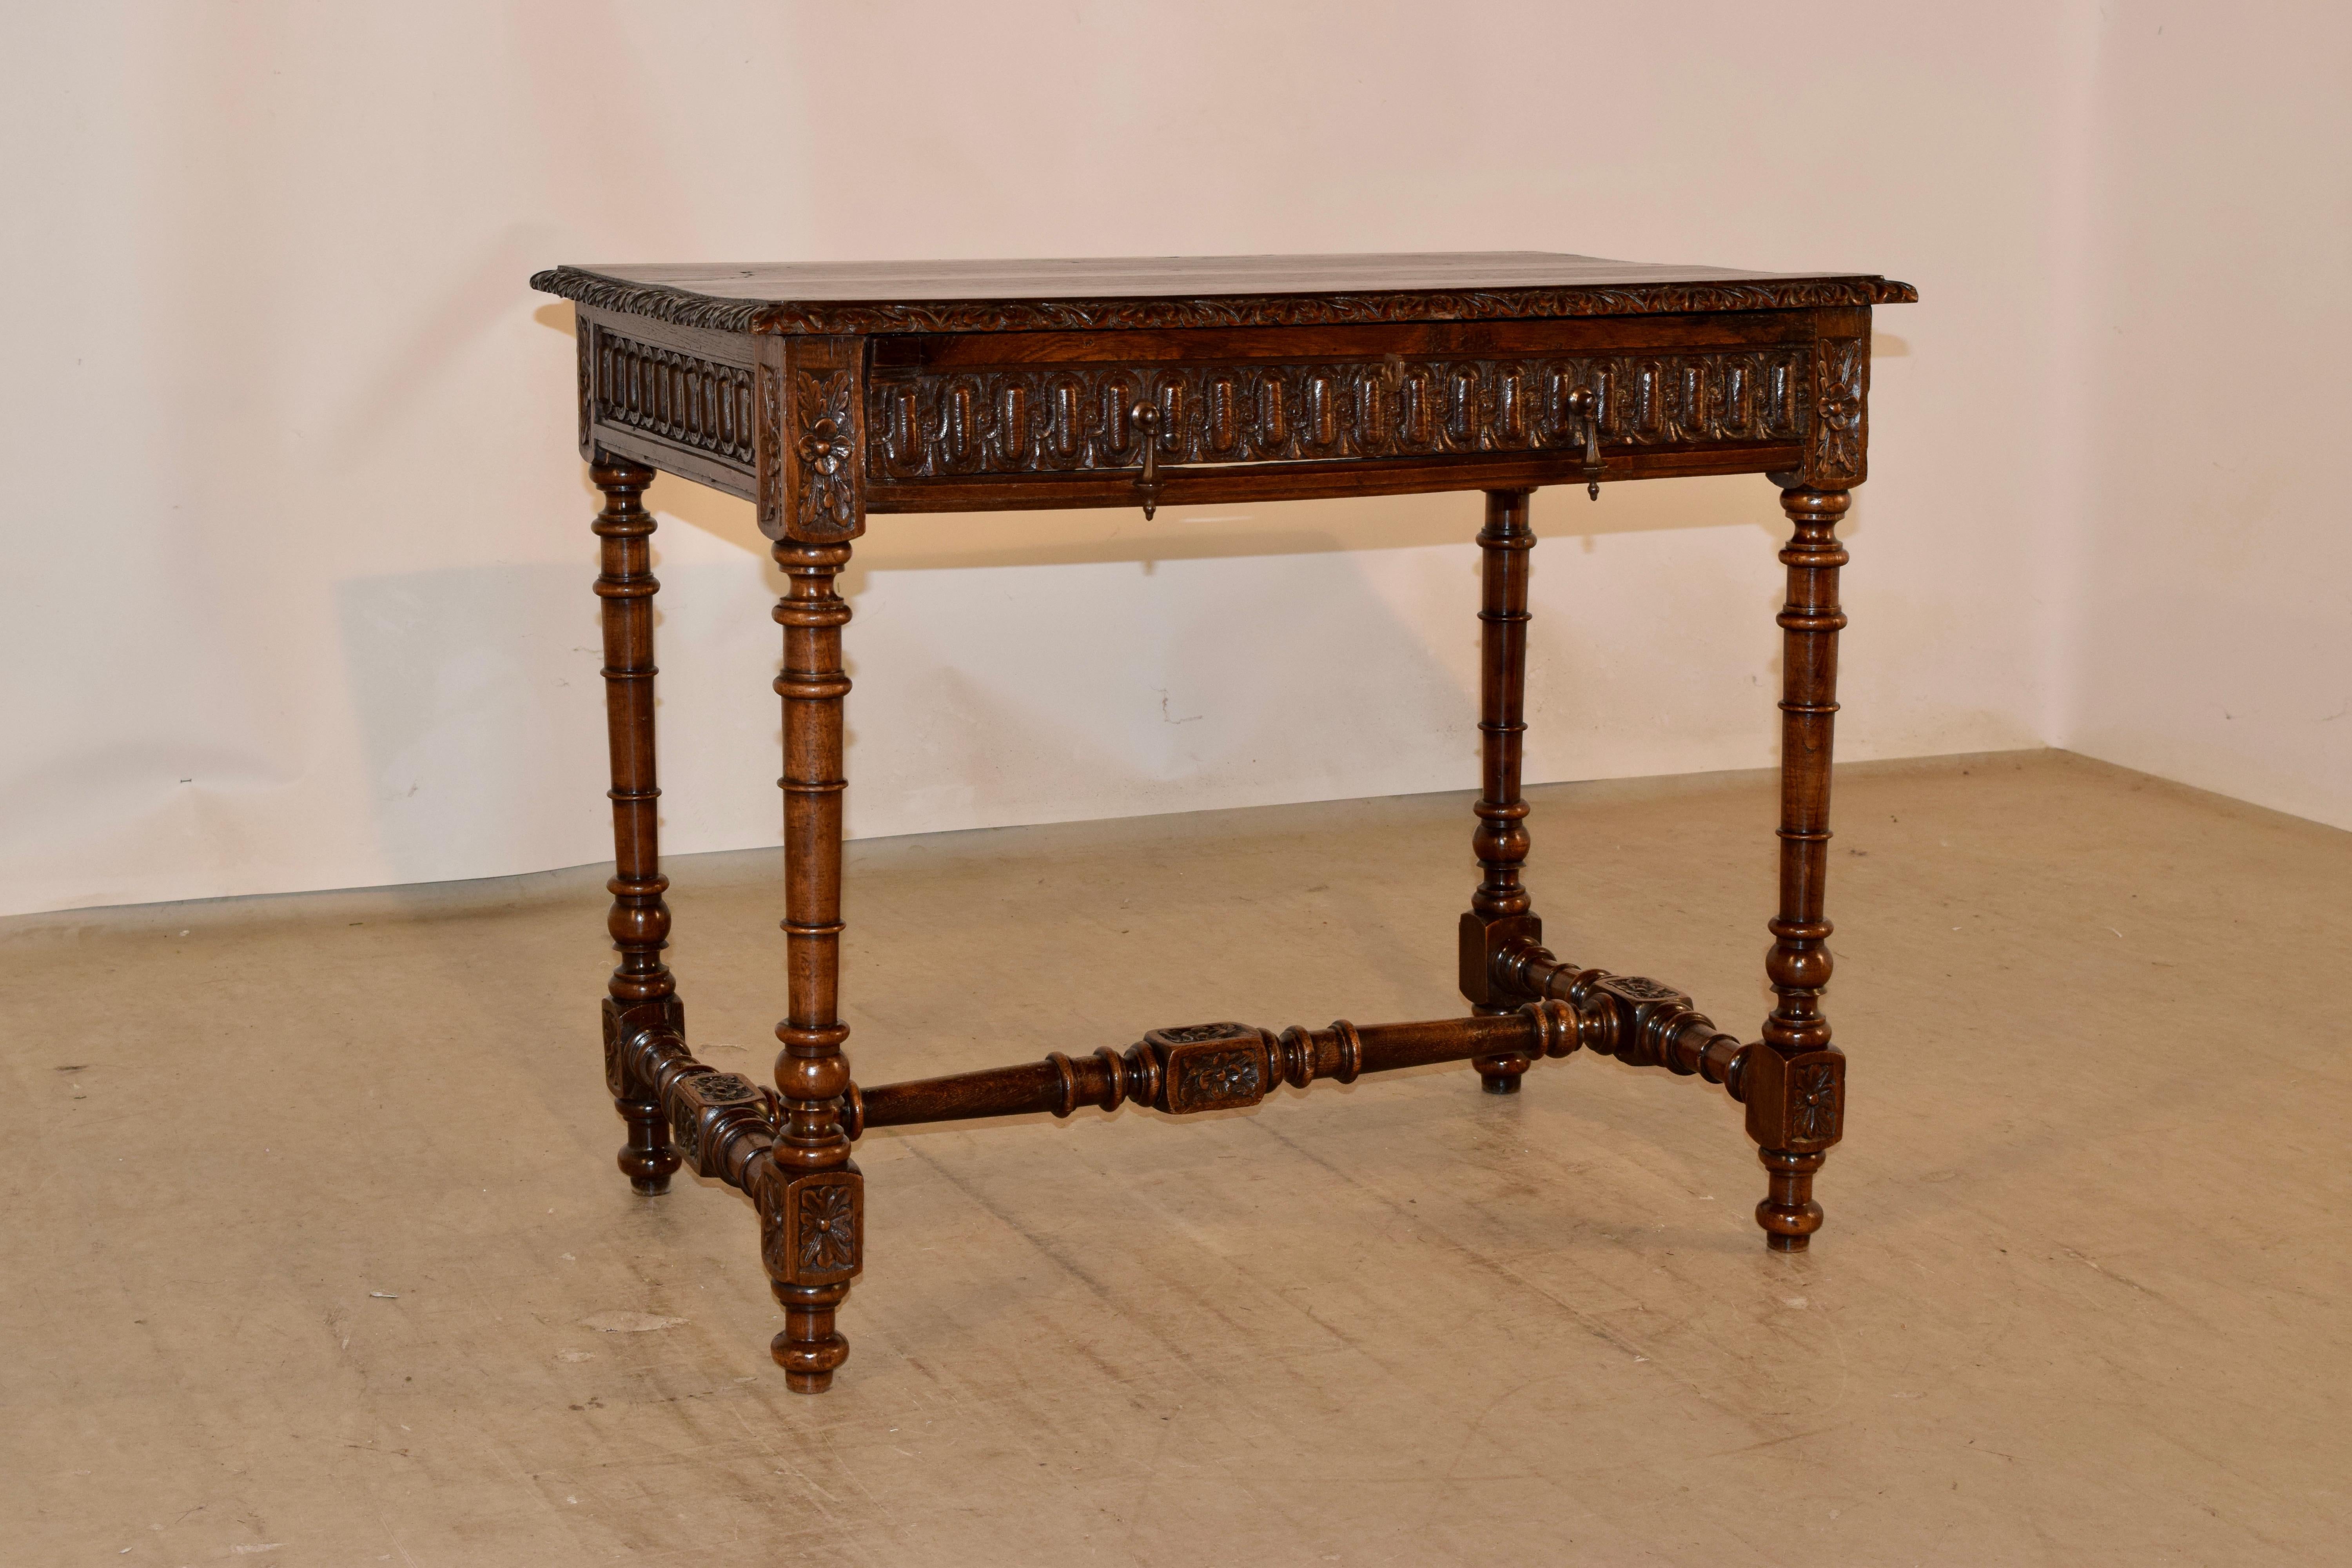 19th century walnut side table from France with a beveled and hand carved decorated edge around the top, following down to a fabulously hand carved apron on all four sides of the table for easy placement in any room. There is a single drawer in the